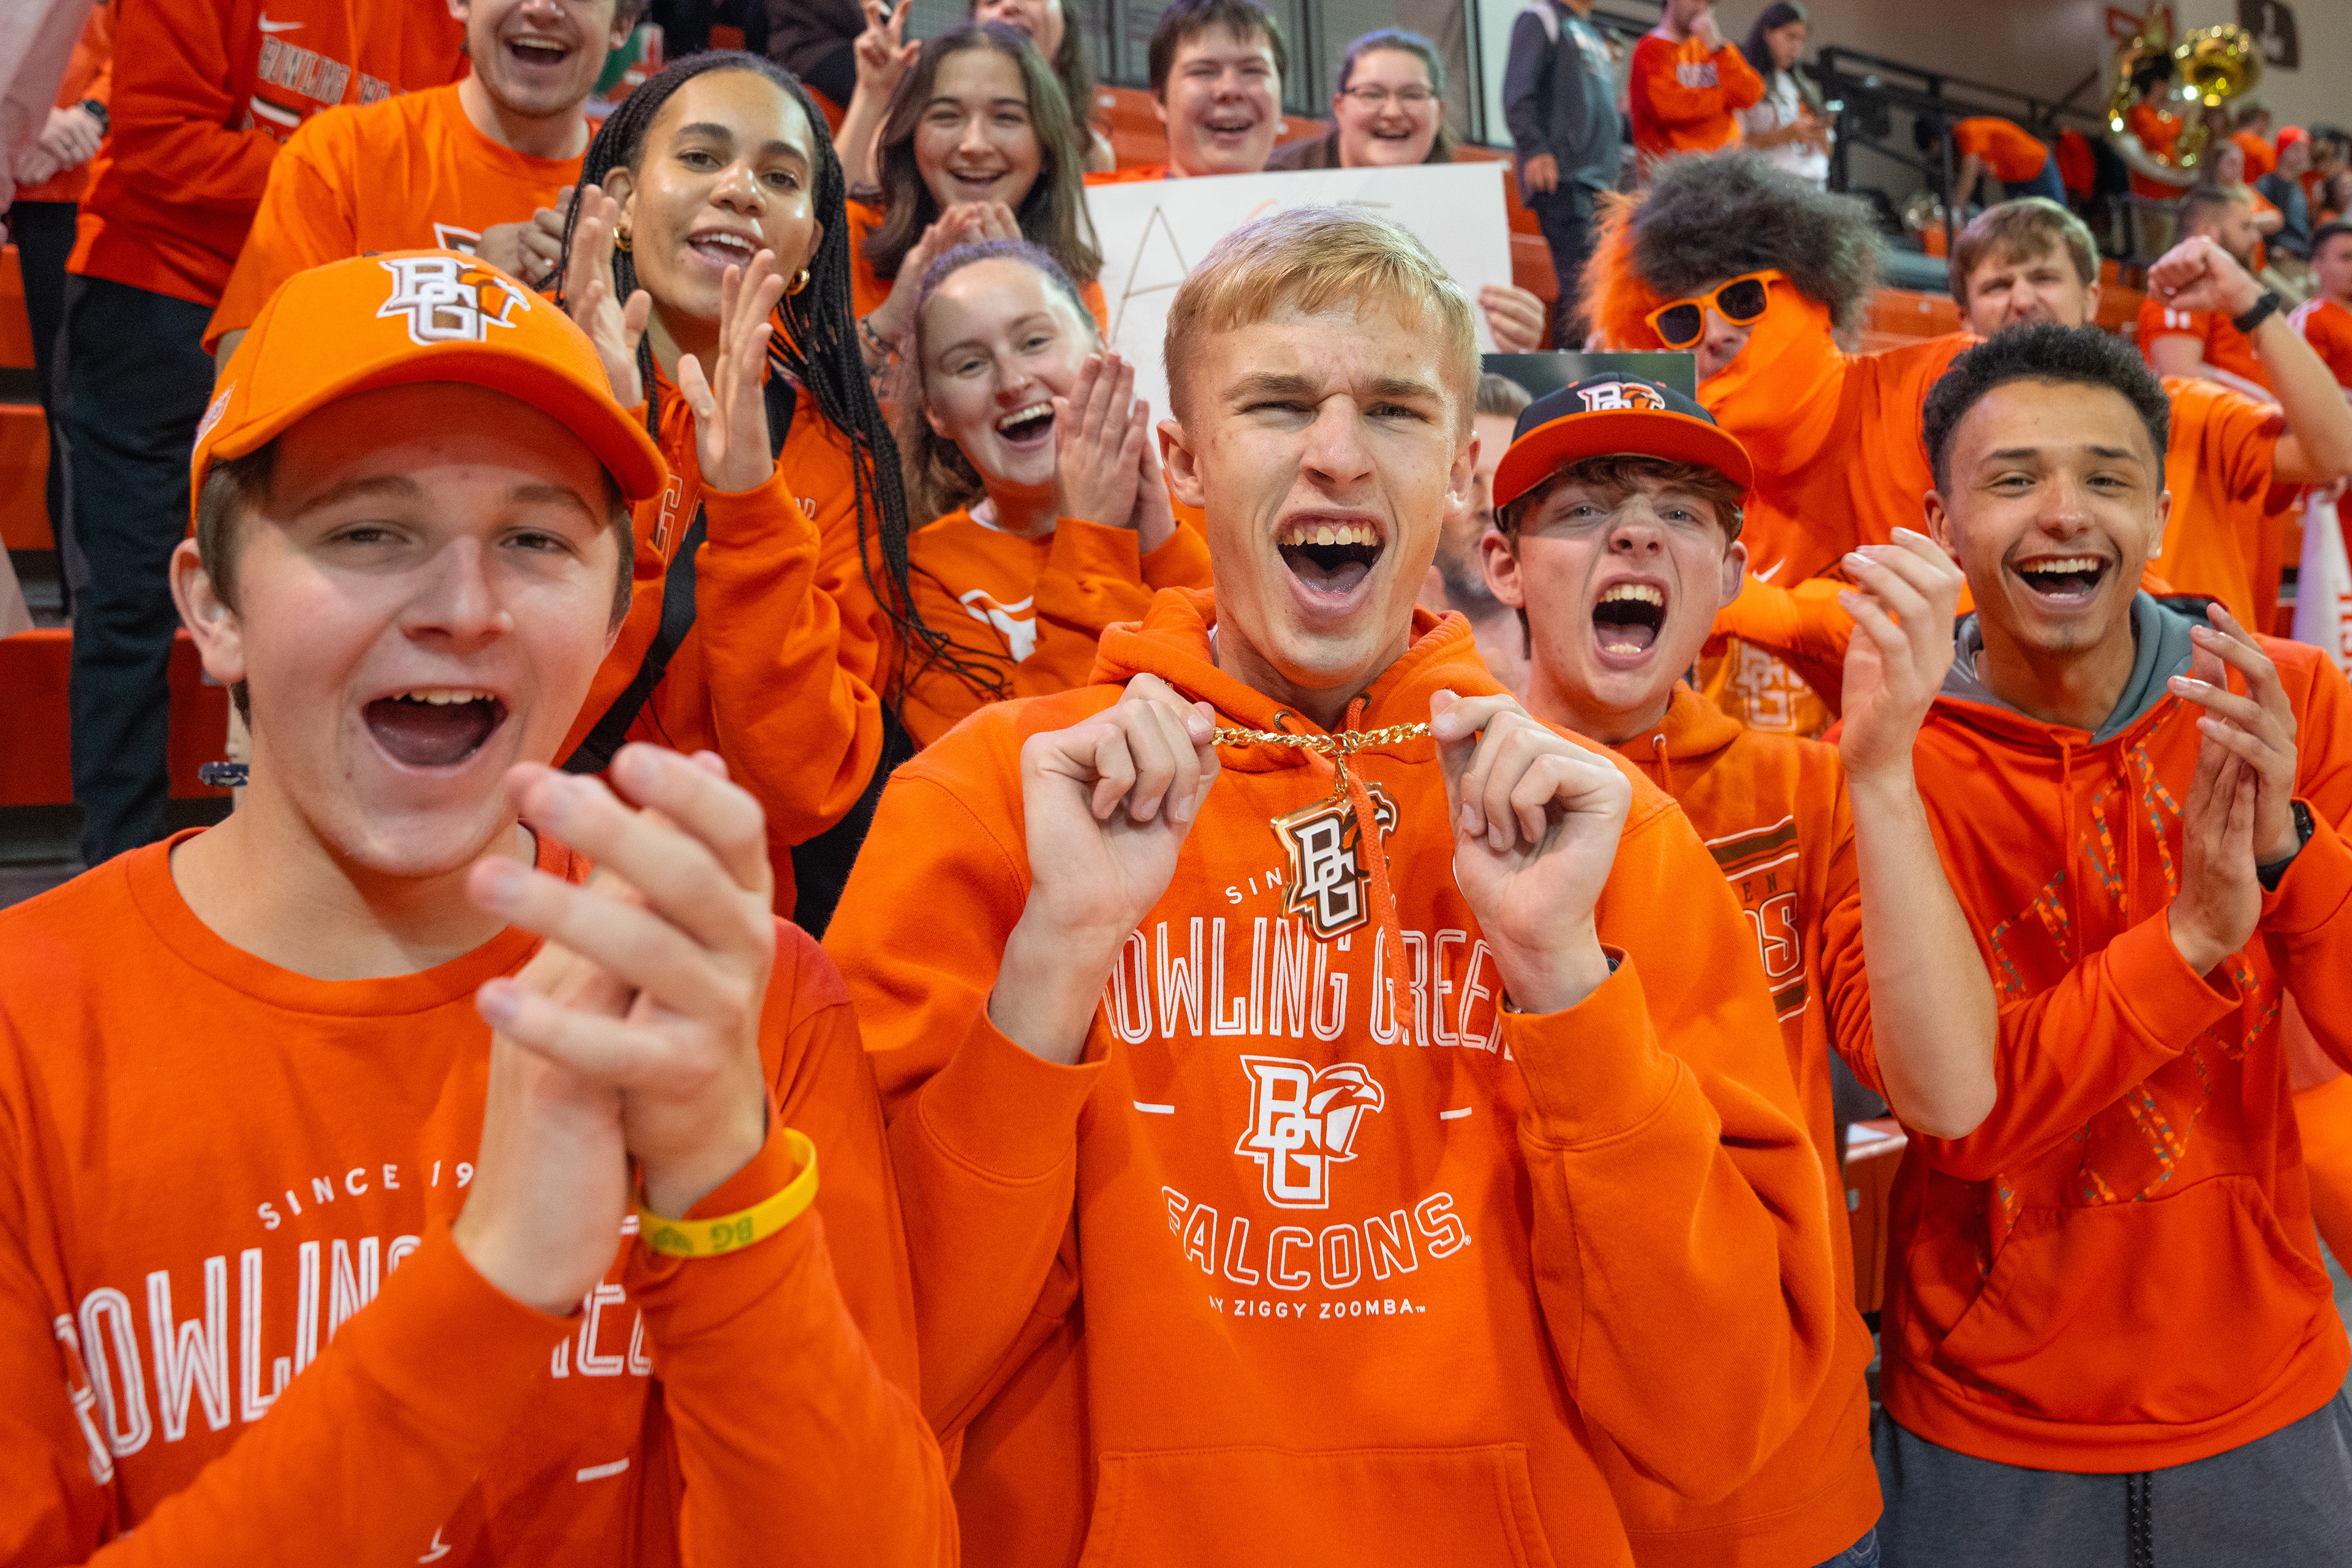 BGSU fans cheer in the stands at the Stroh Center during a women's basketball game